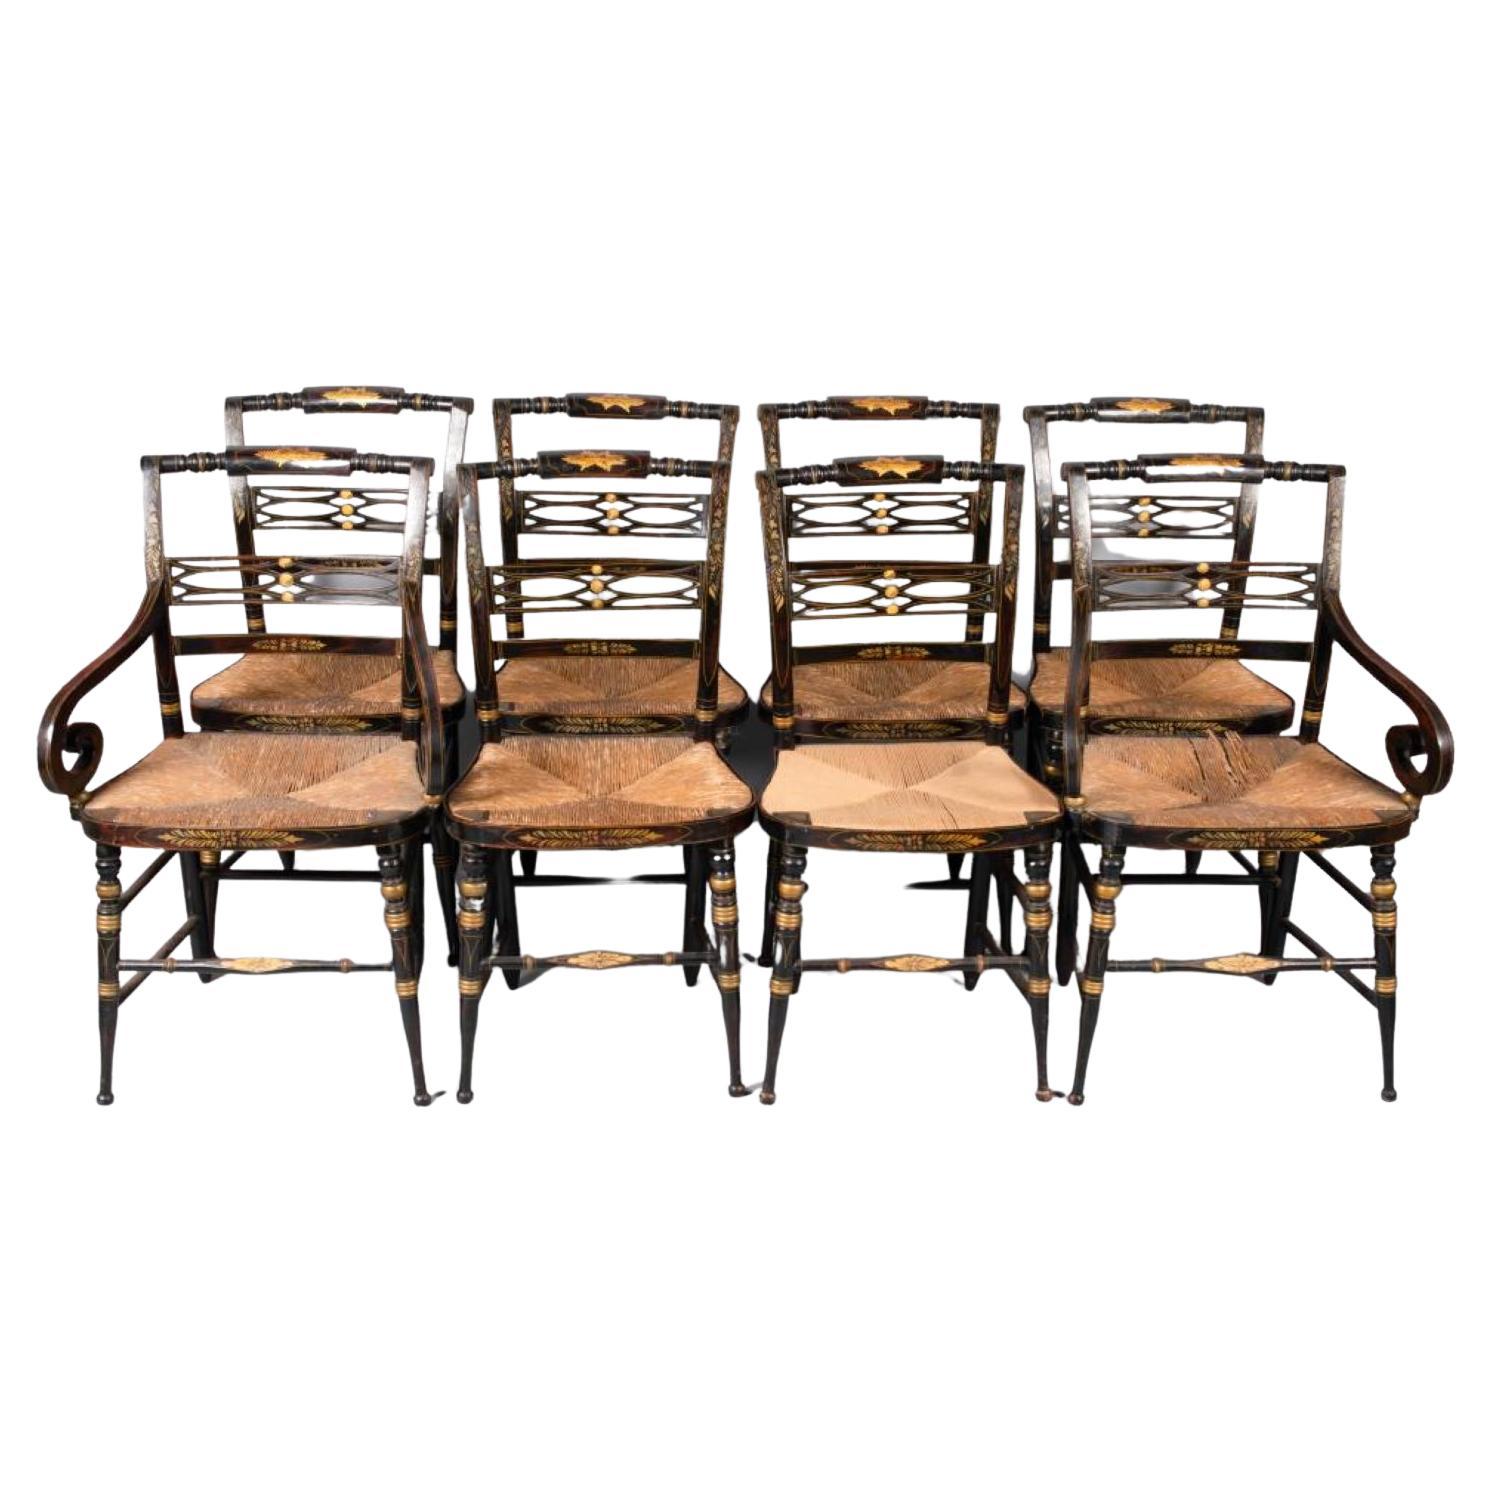 Set of 8 Late Federal Period Hitchcock Chairs